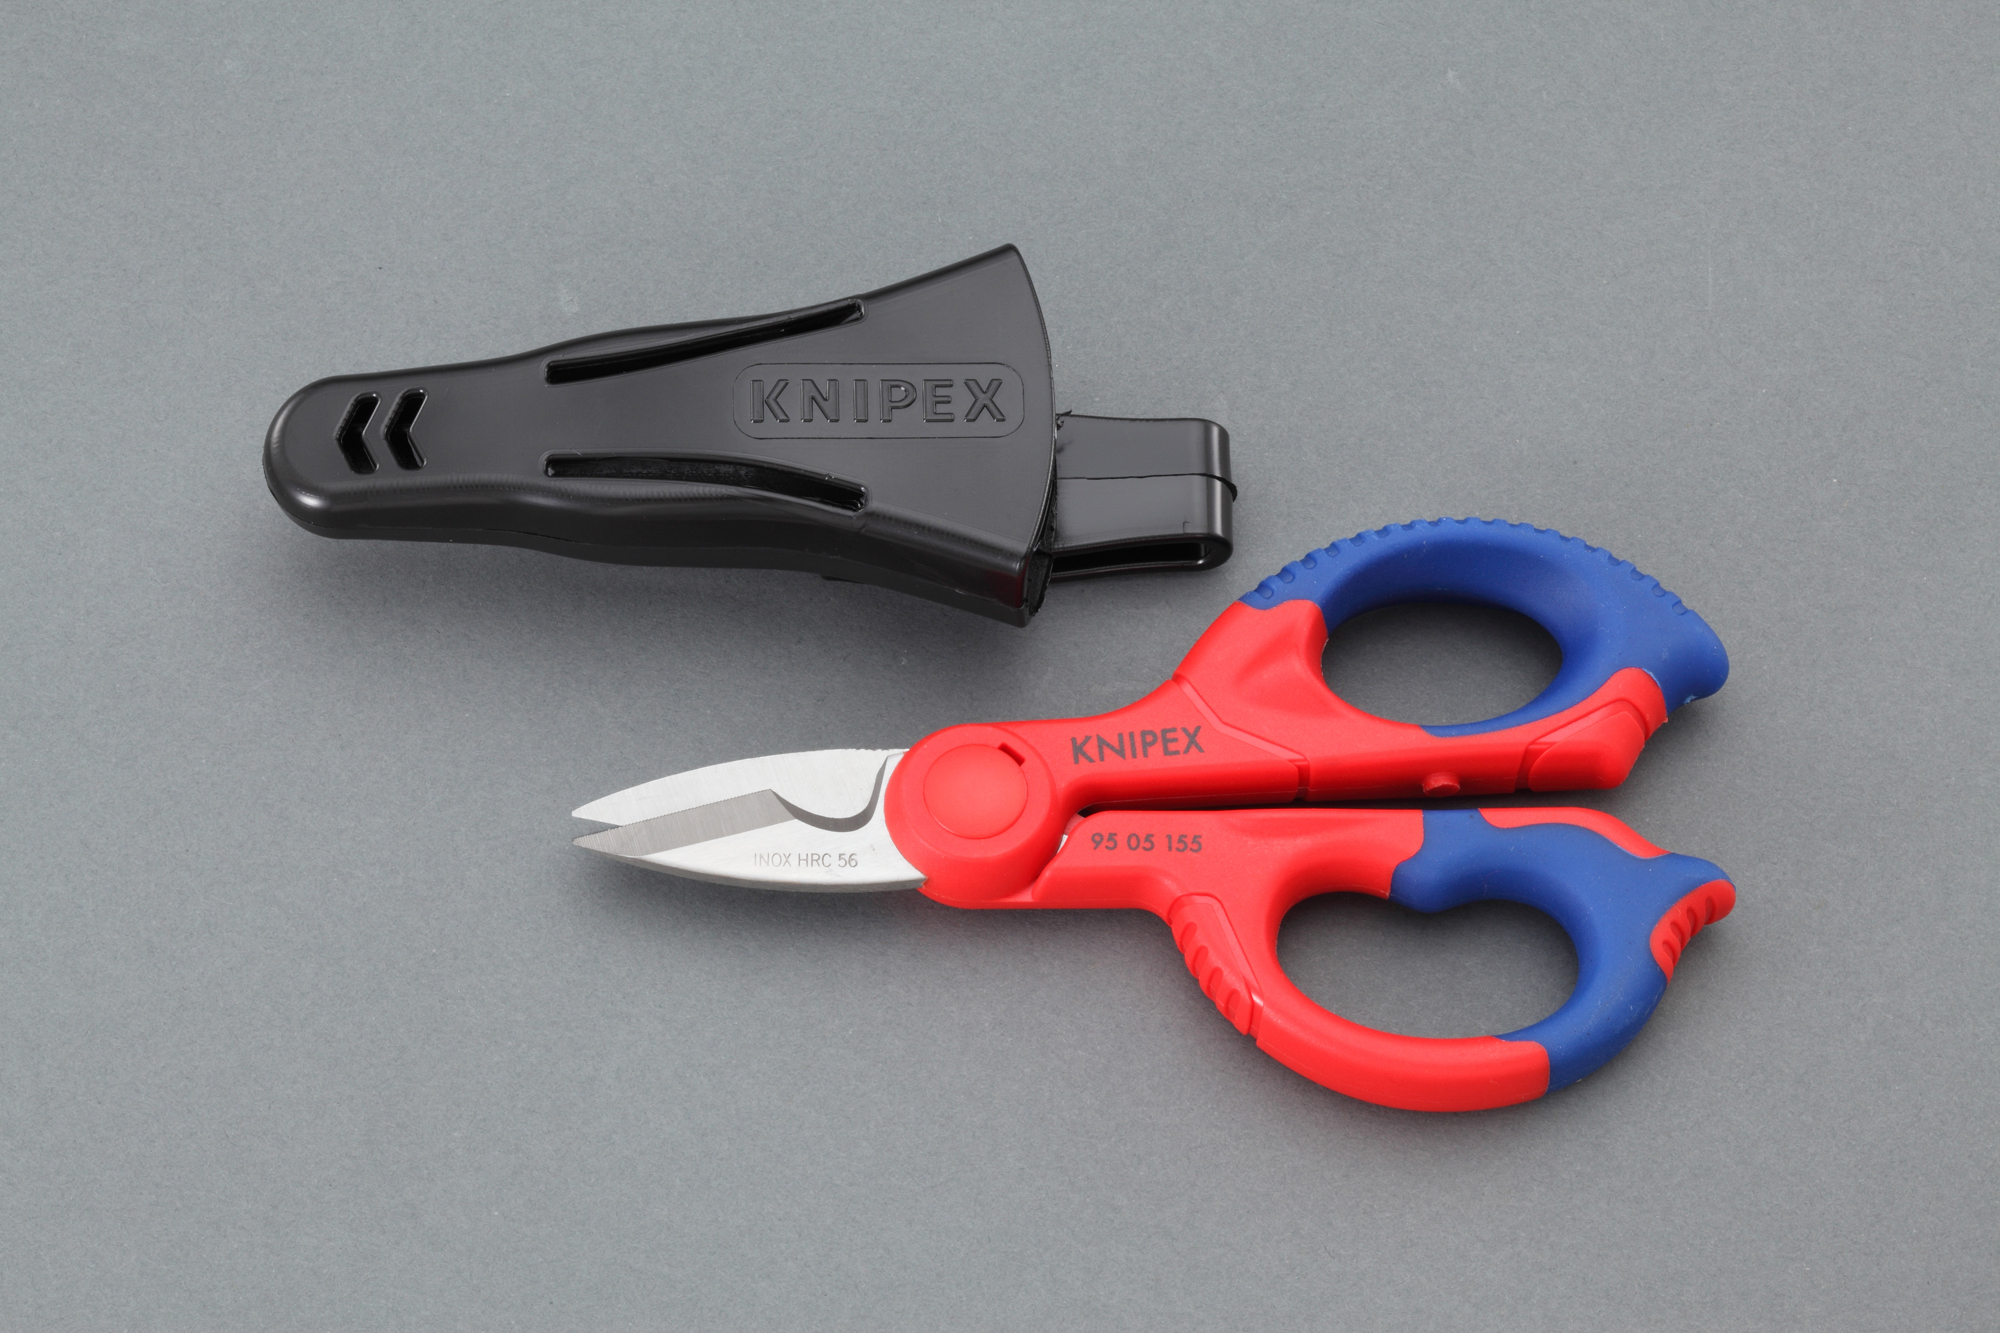 Electricians' Shears